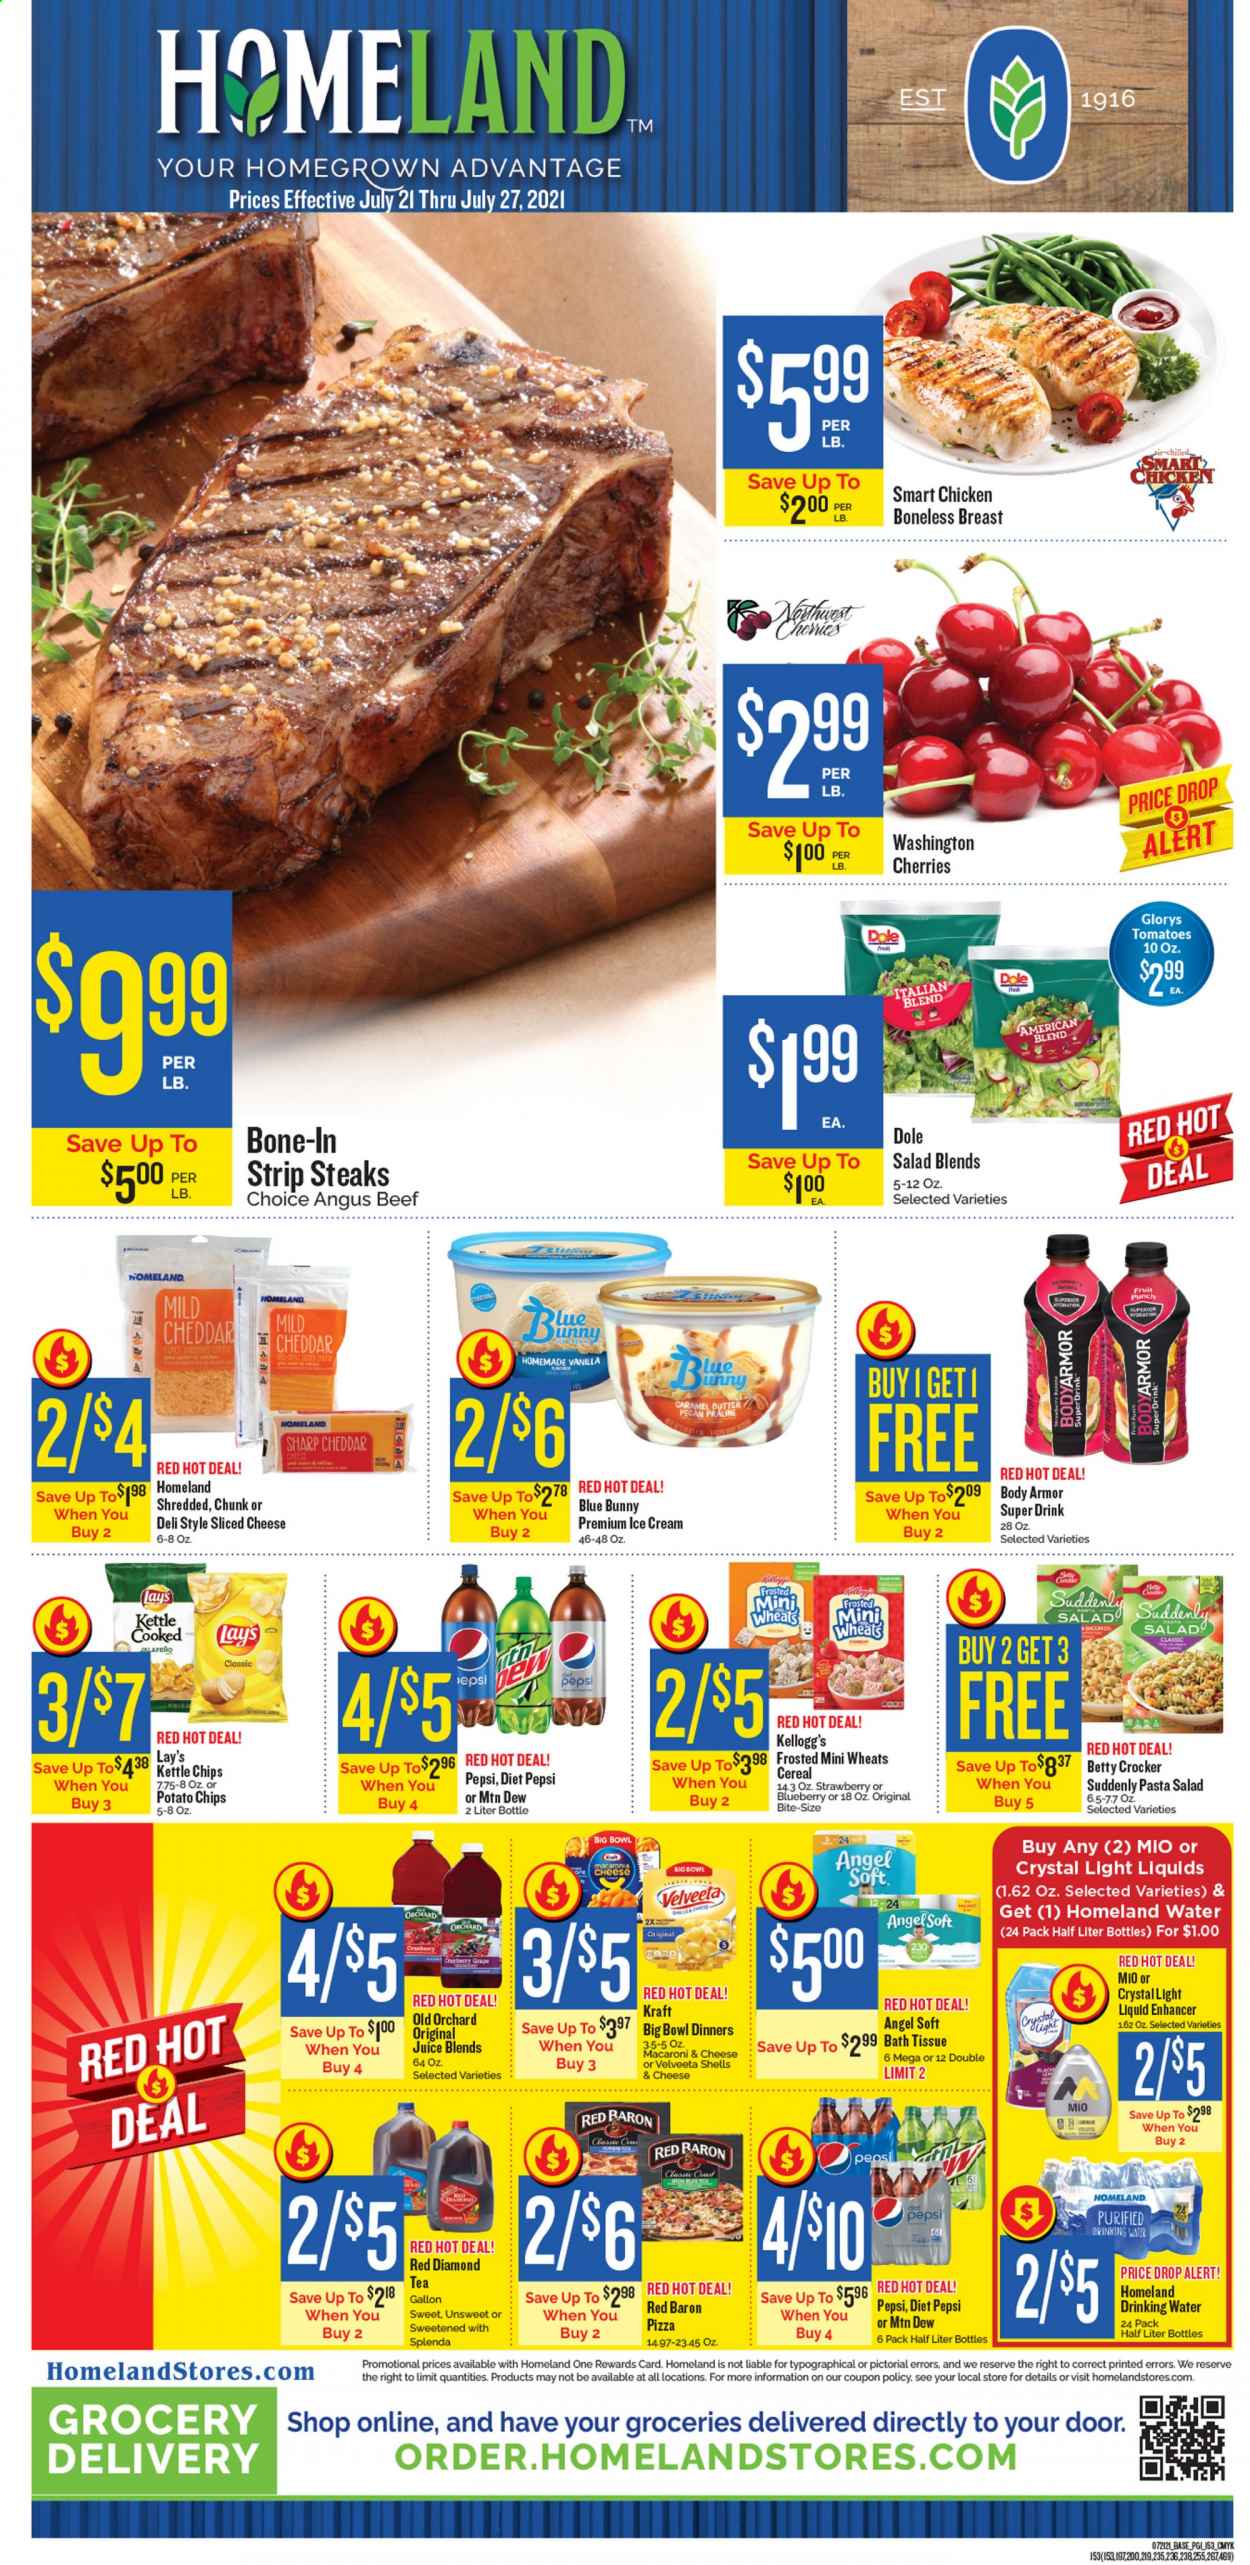 thumbnail - Homeland Flyer - 07/21/2021 - 07/27/2021 - Sales products - tomatoes, salad, Dole, cherries, macaroni & cheese, pizza, pasta, Kraft®, pasta salad, mild cheddar, sliced cheese, ice cream, Blue Bunny, Red Baron, Kellogg's, potato chips, chips, Lay’s, cereals, caramel, Mountain Dew, Pepsi, juice, Diet Pepsi, fruit punch, tea, beef meat, steak, striploin steak, bath tissue. Page 1.